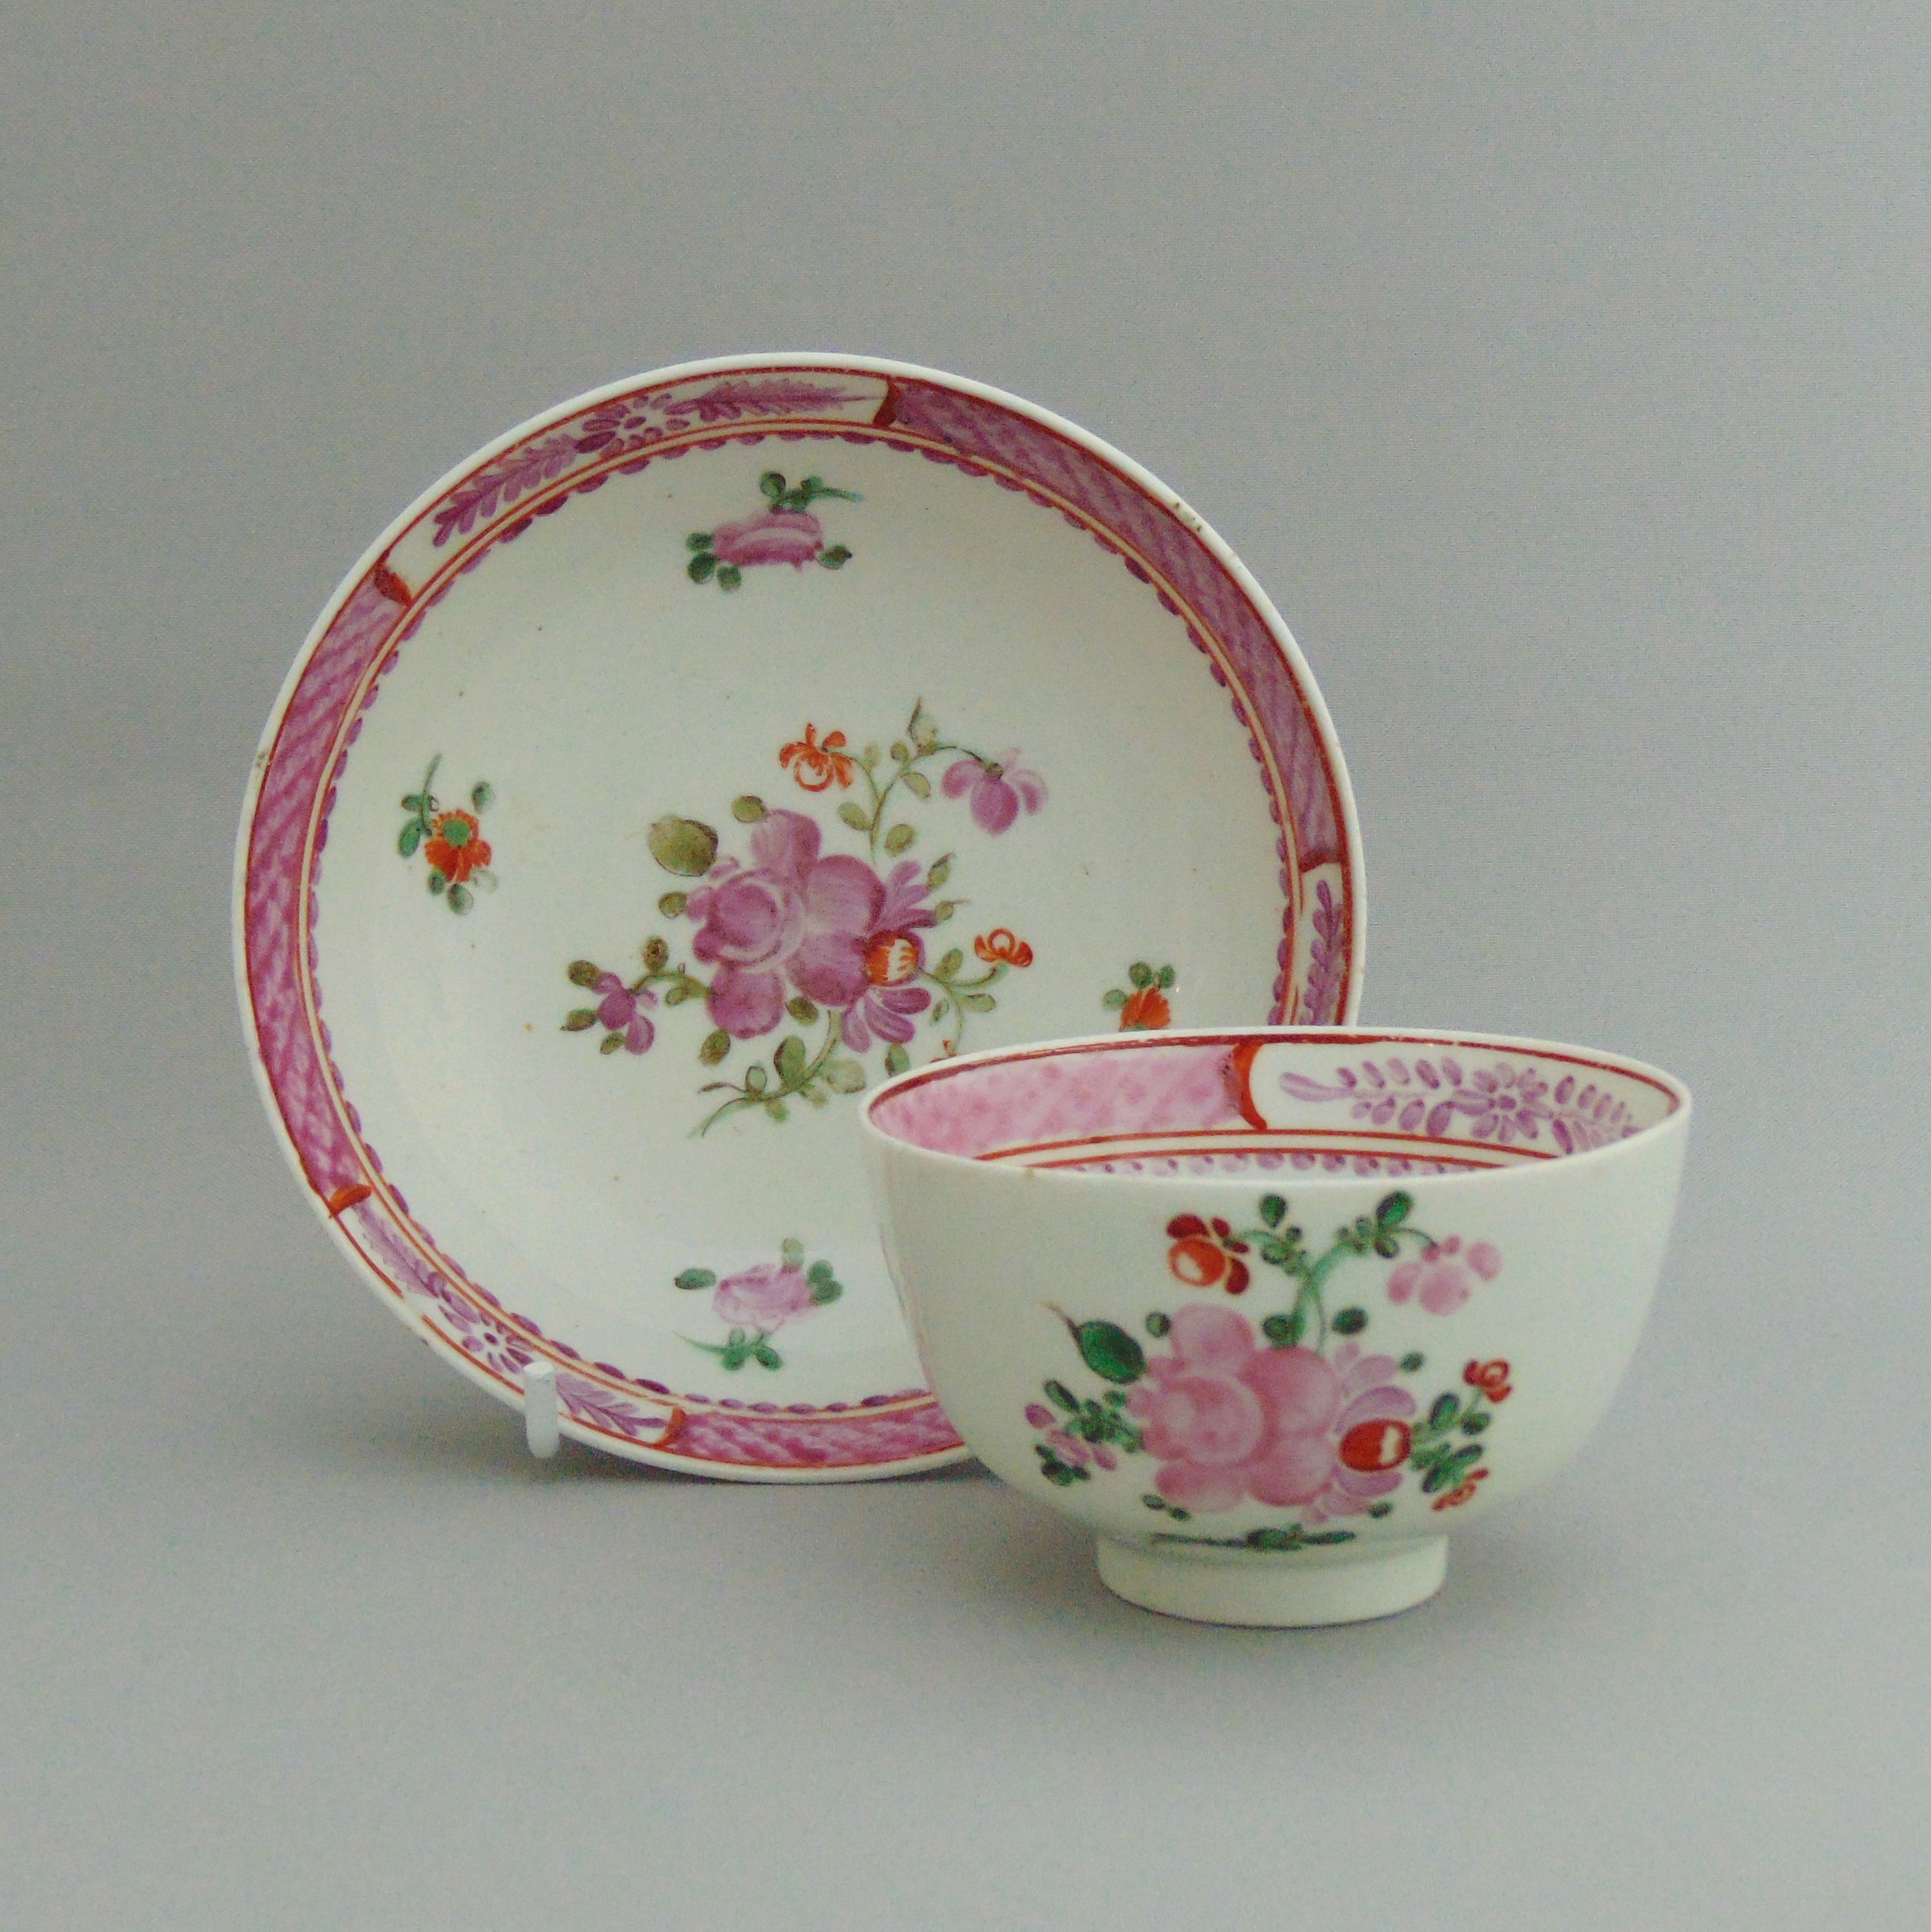 A Lowestoft polychrome tea bowl and saucer, Chinese Export Style, pink borders with floral sprays,